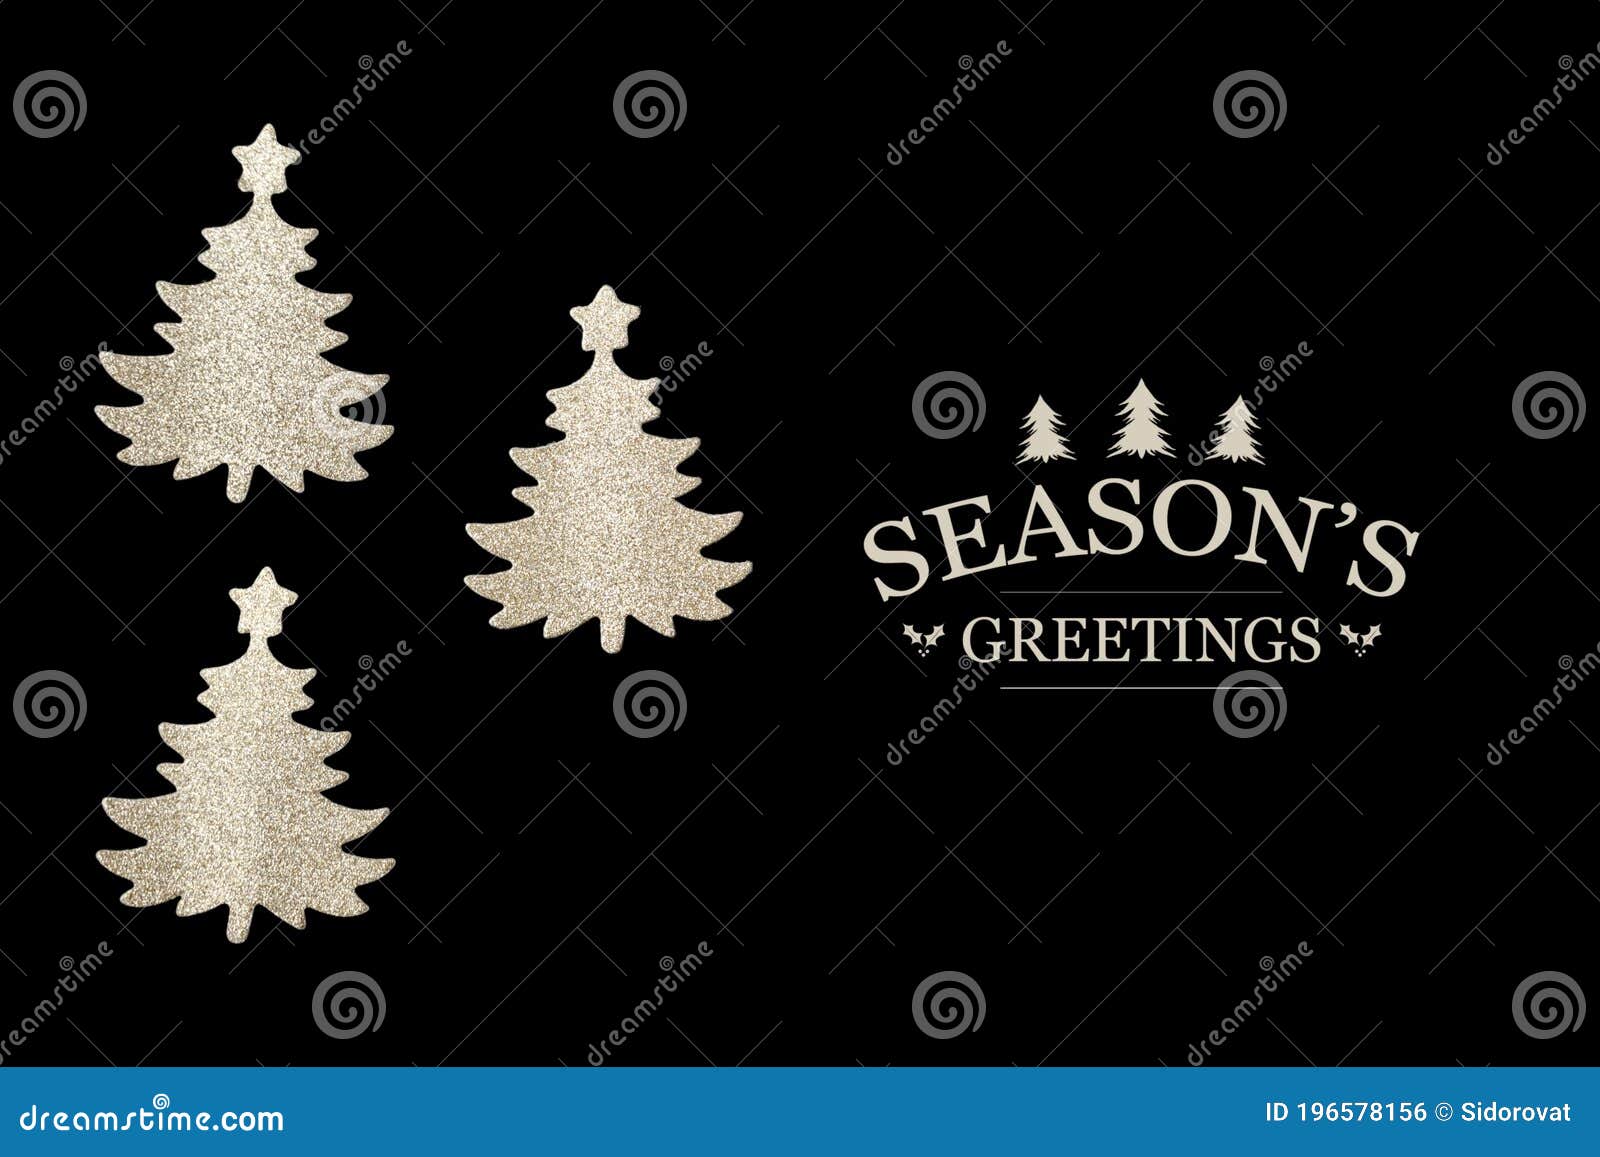 three cutout christmas trees on black background with seasons`s greetings text